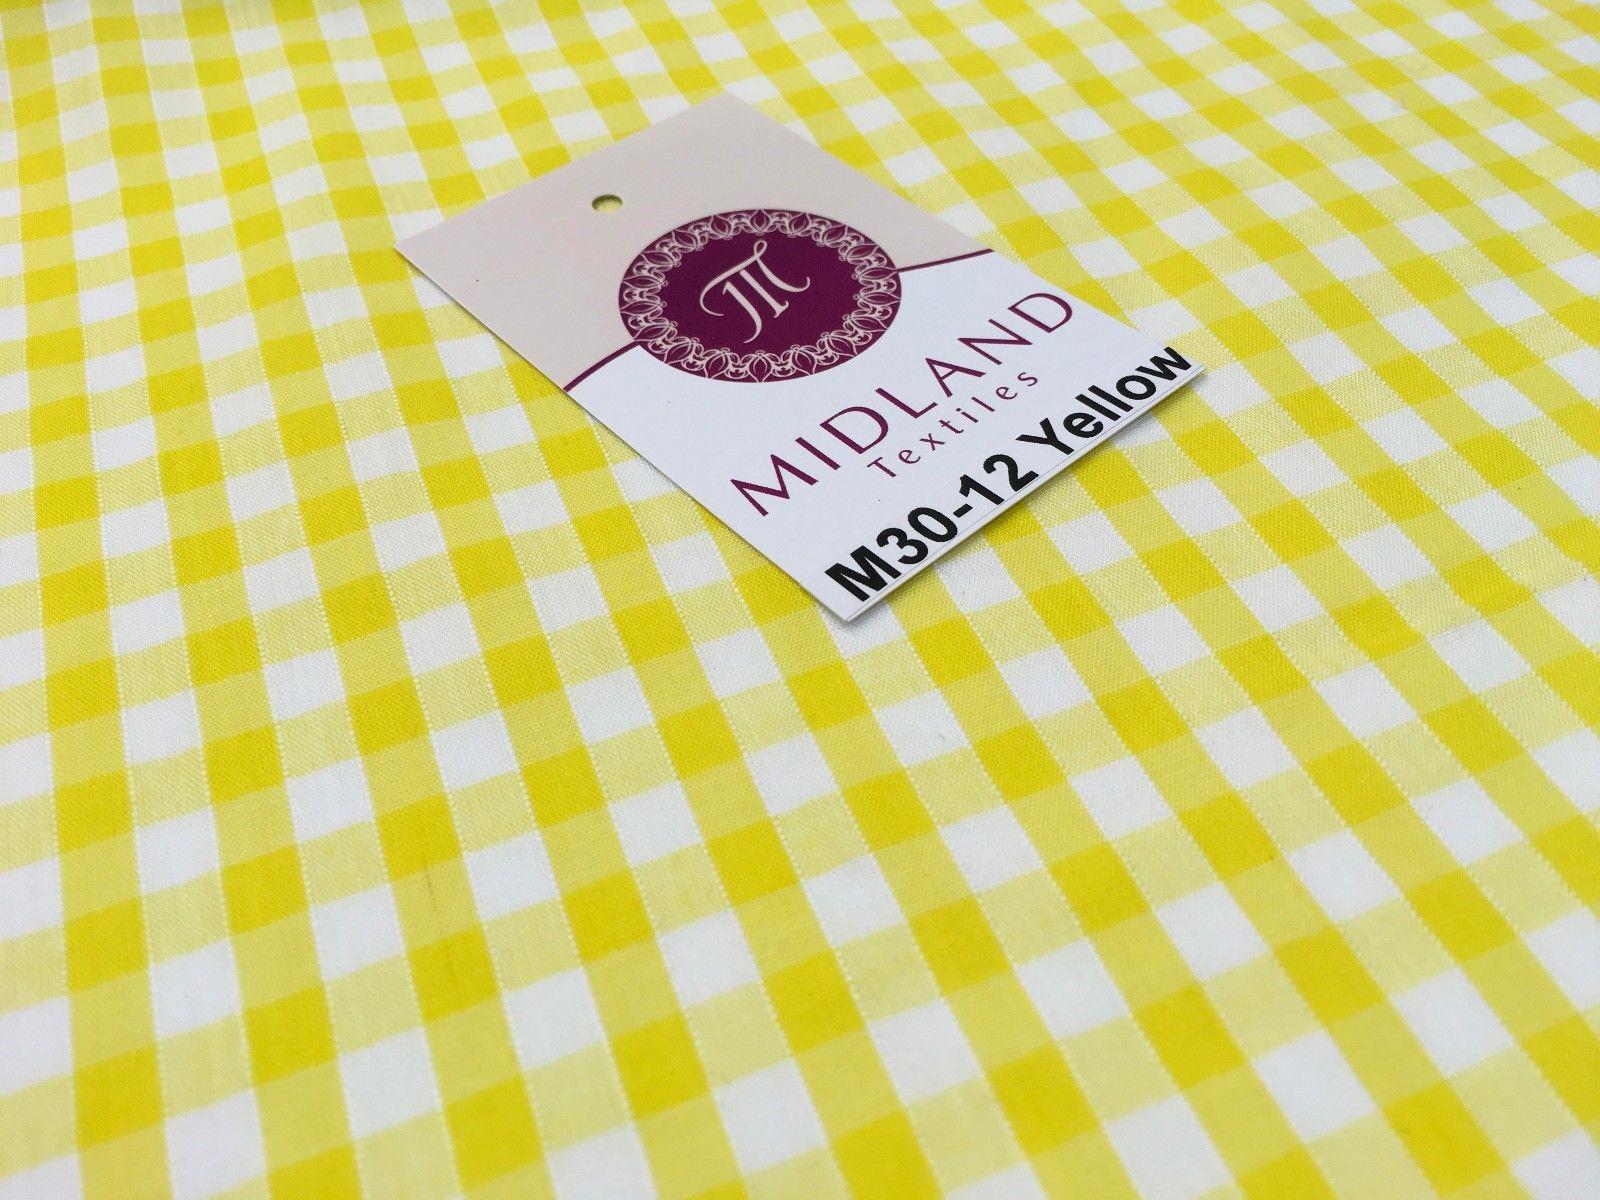 Timeless 1/4 Inch Gingham Fabric Material for Clothing, Aprons, Tablecloths, School Decorations - 44" Wide - M30